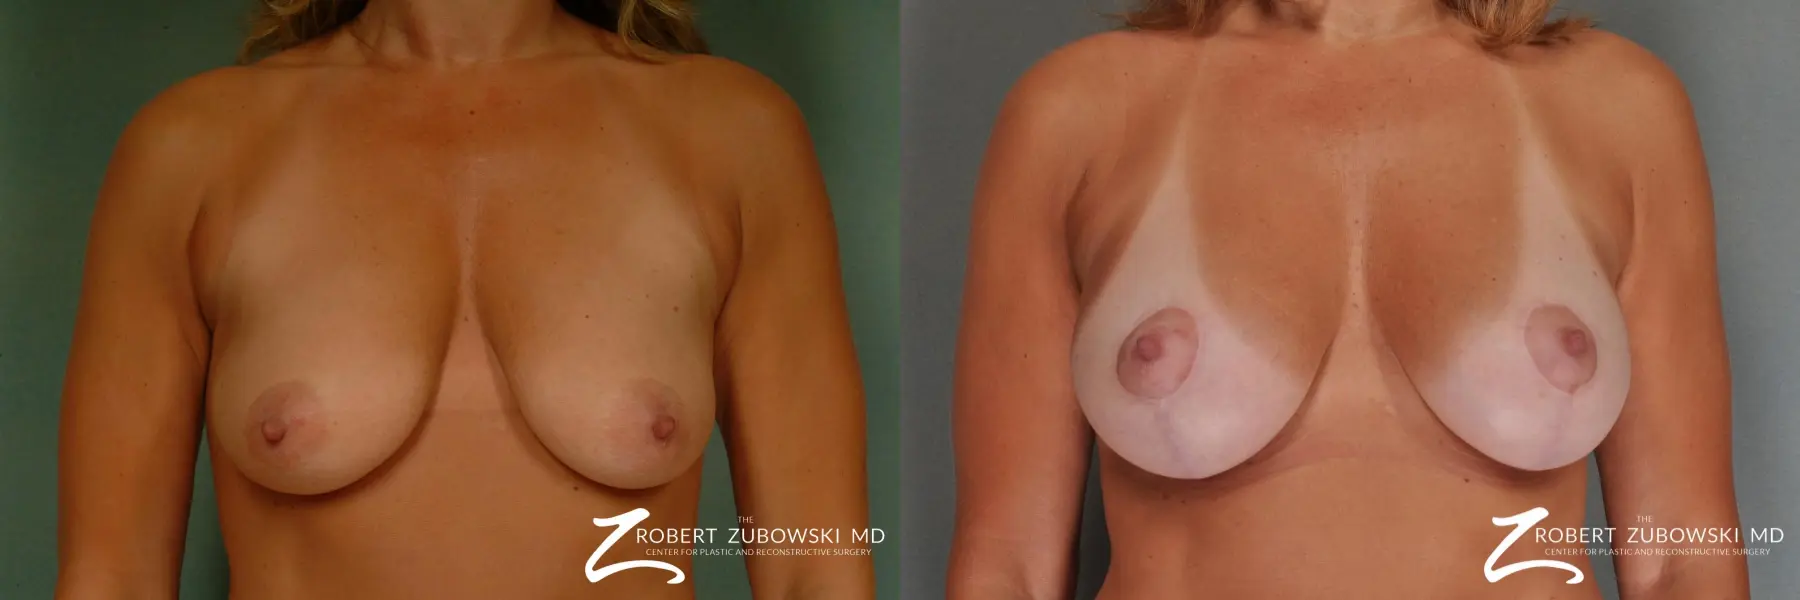 Breast Lift And Augmentation: Patient 5 - Before and After 1